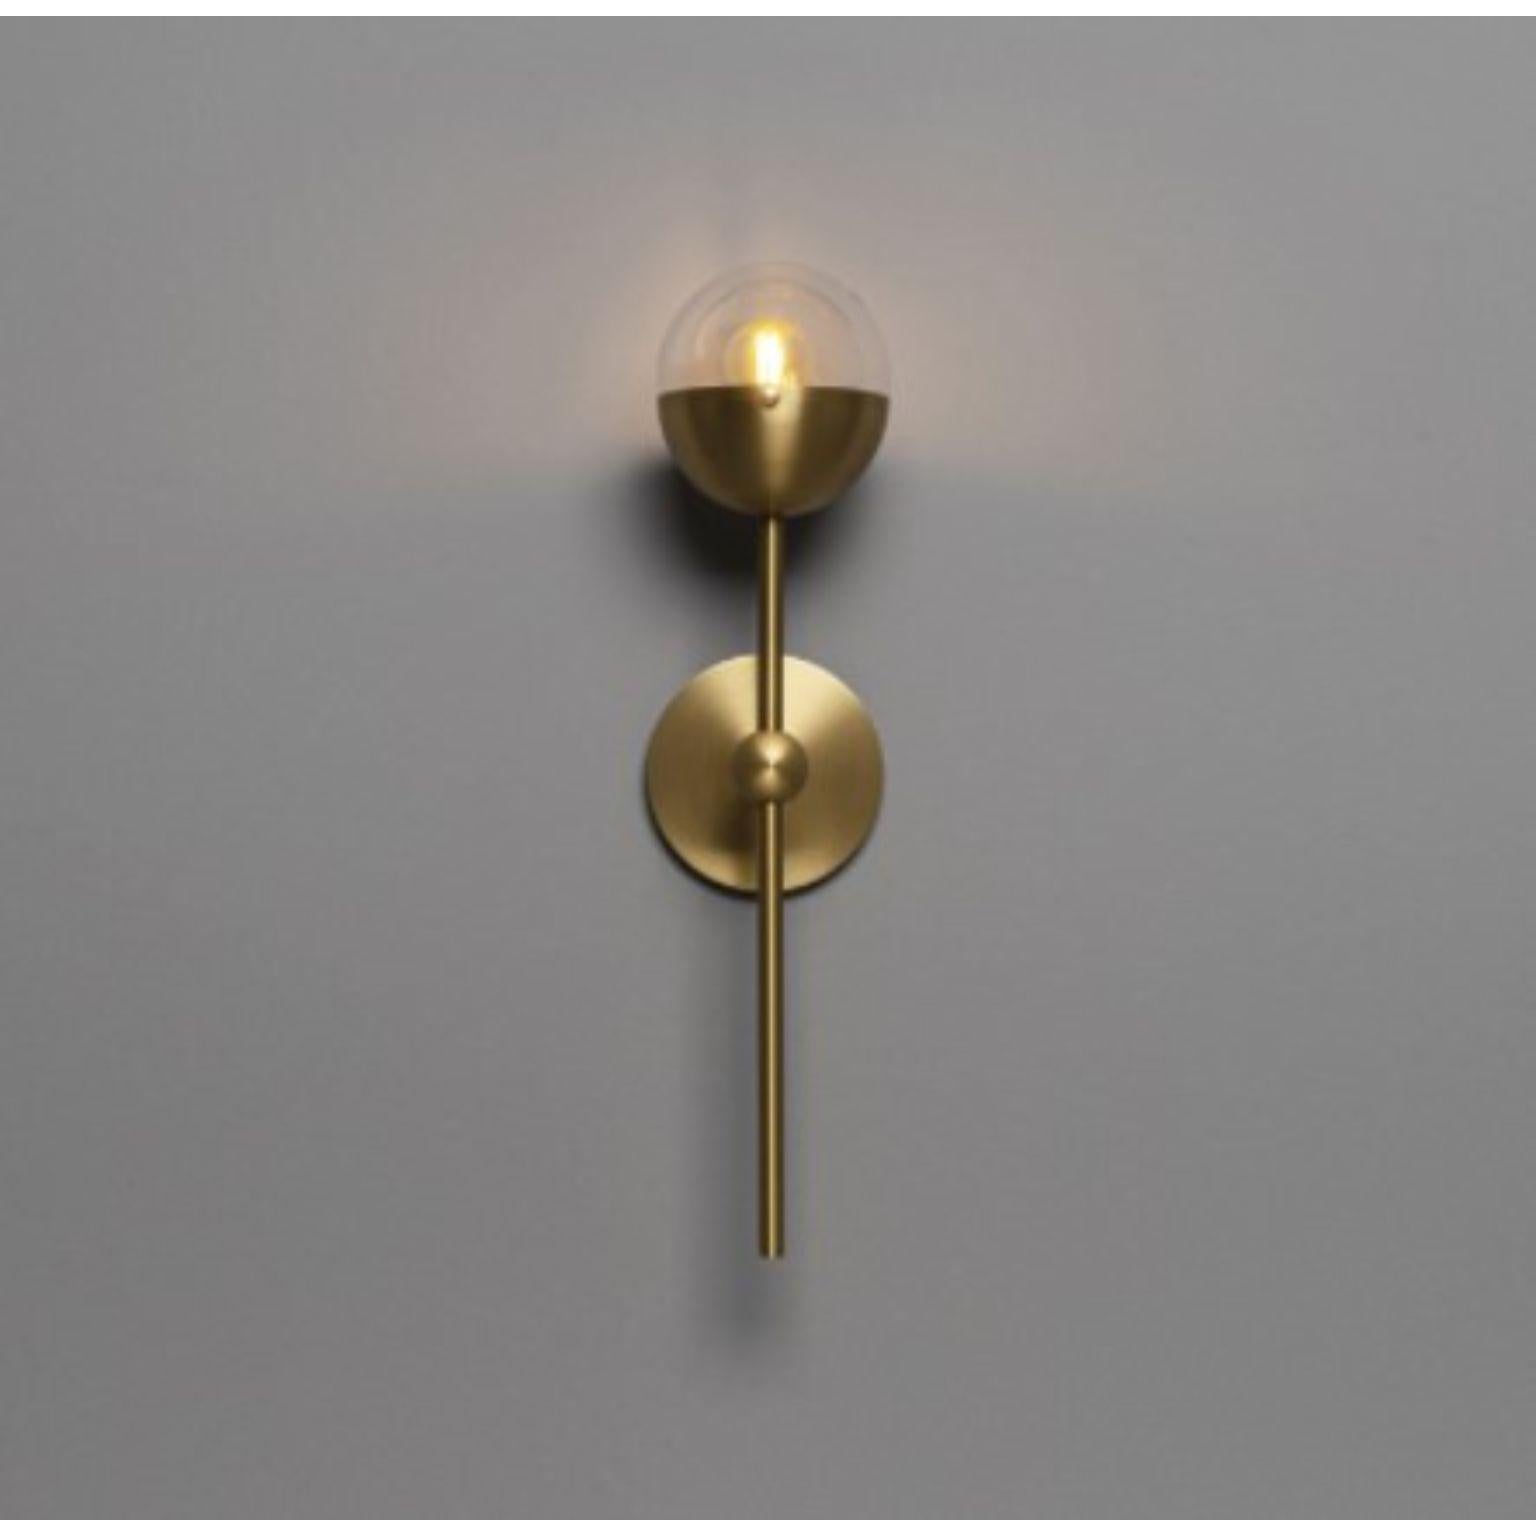 Molecule single wall sconce by Schwung
Dimensions: W 12.5 x D 14.4 x H 50.8 cm
Materials: Brass, opal glass
Weight: 1.7 kg

Finishes available: Black gunmetal, polished nickel, brass
Other sizes available.

 Schwung is a german word, and